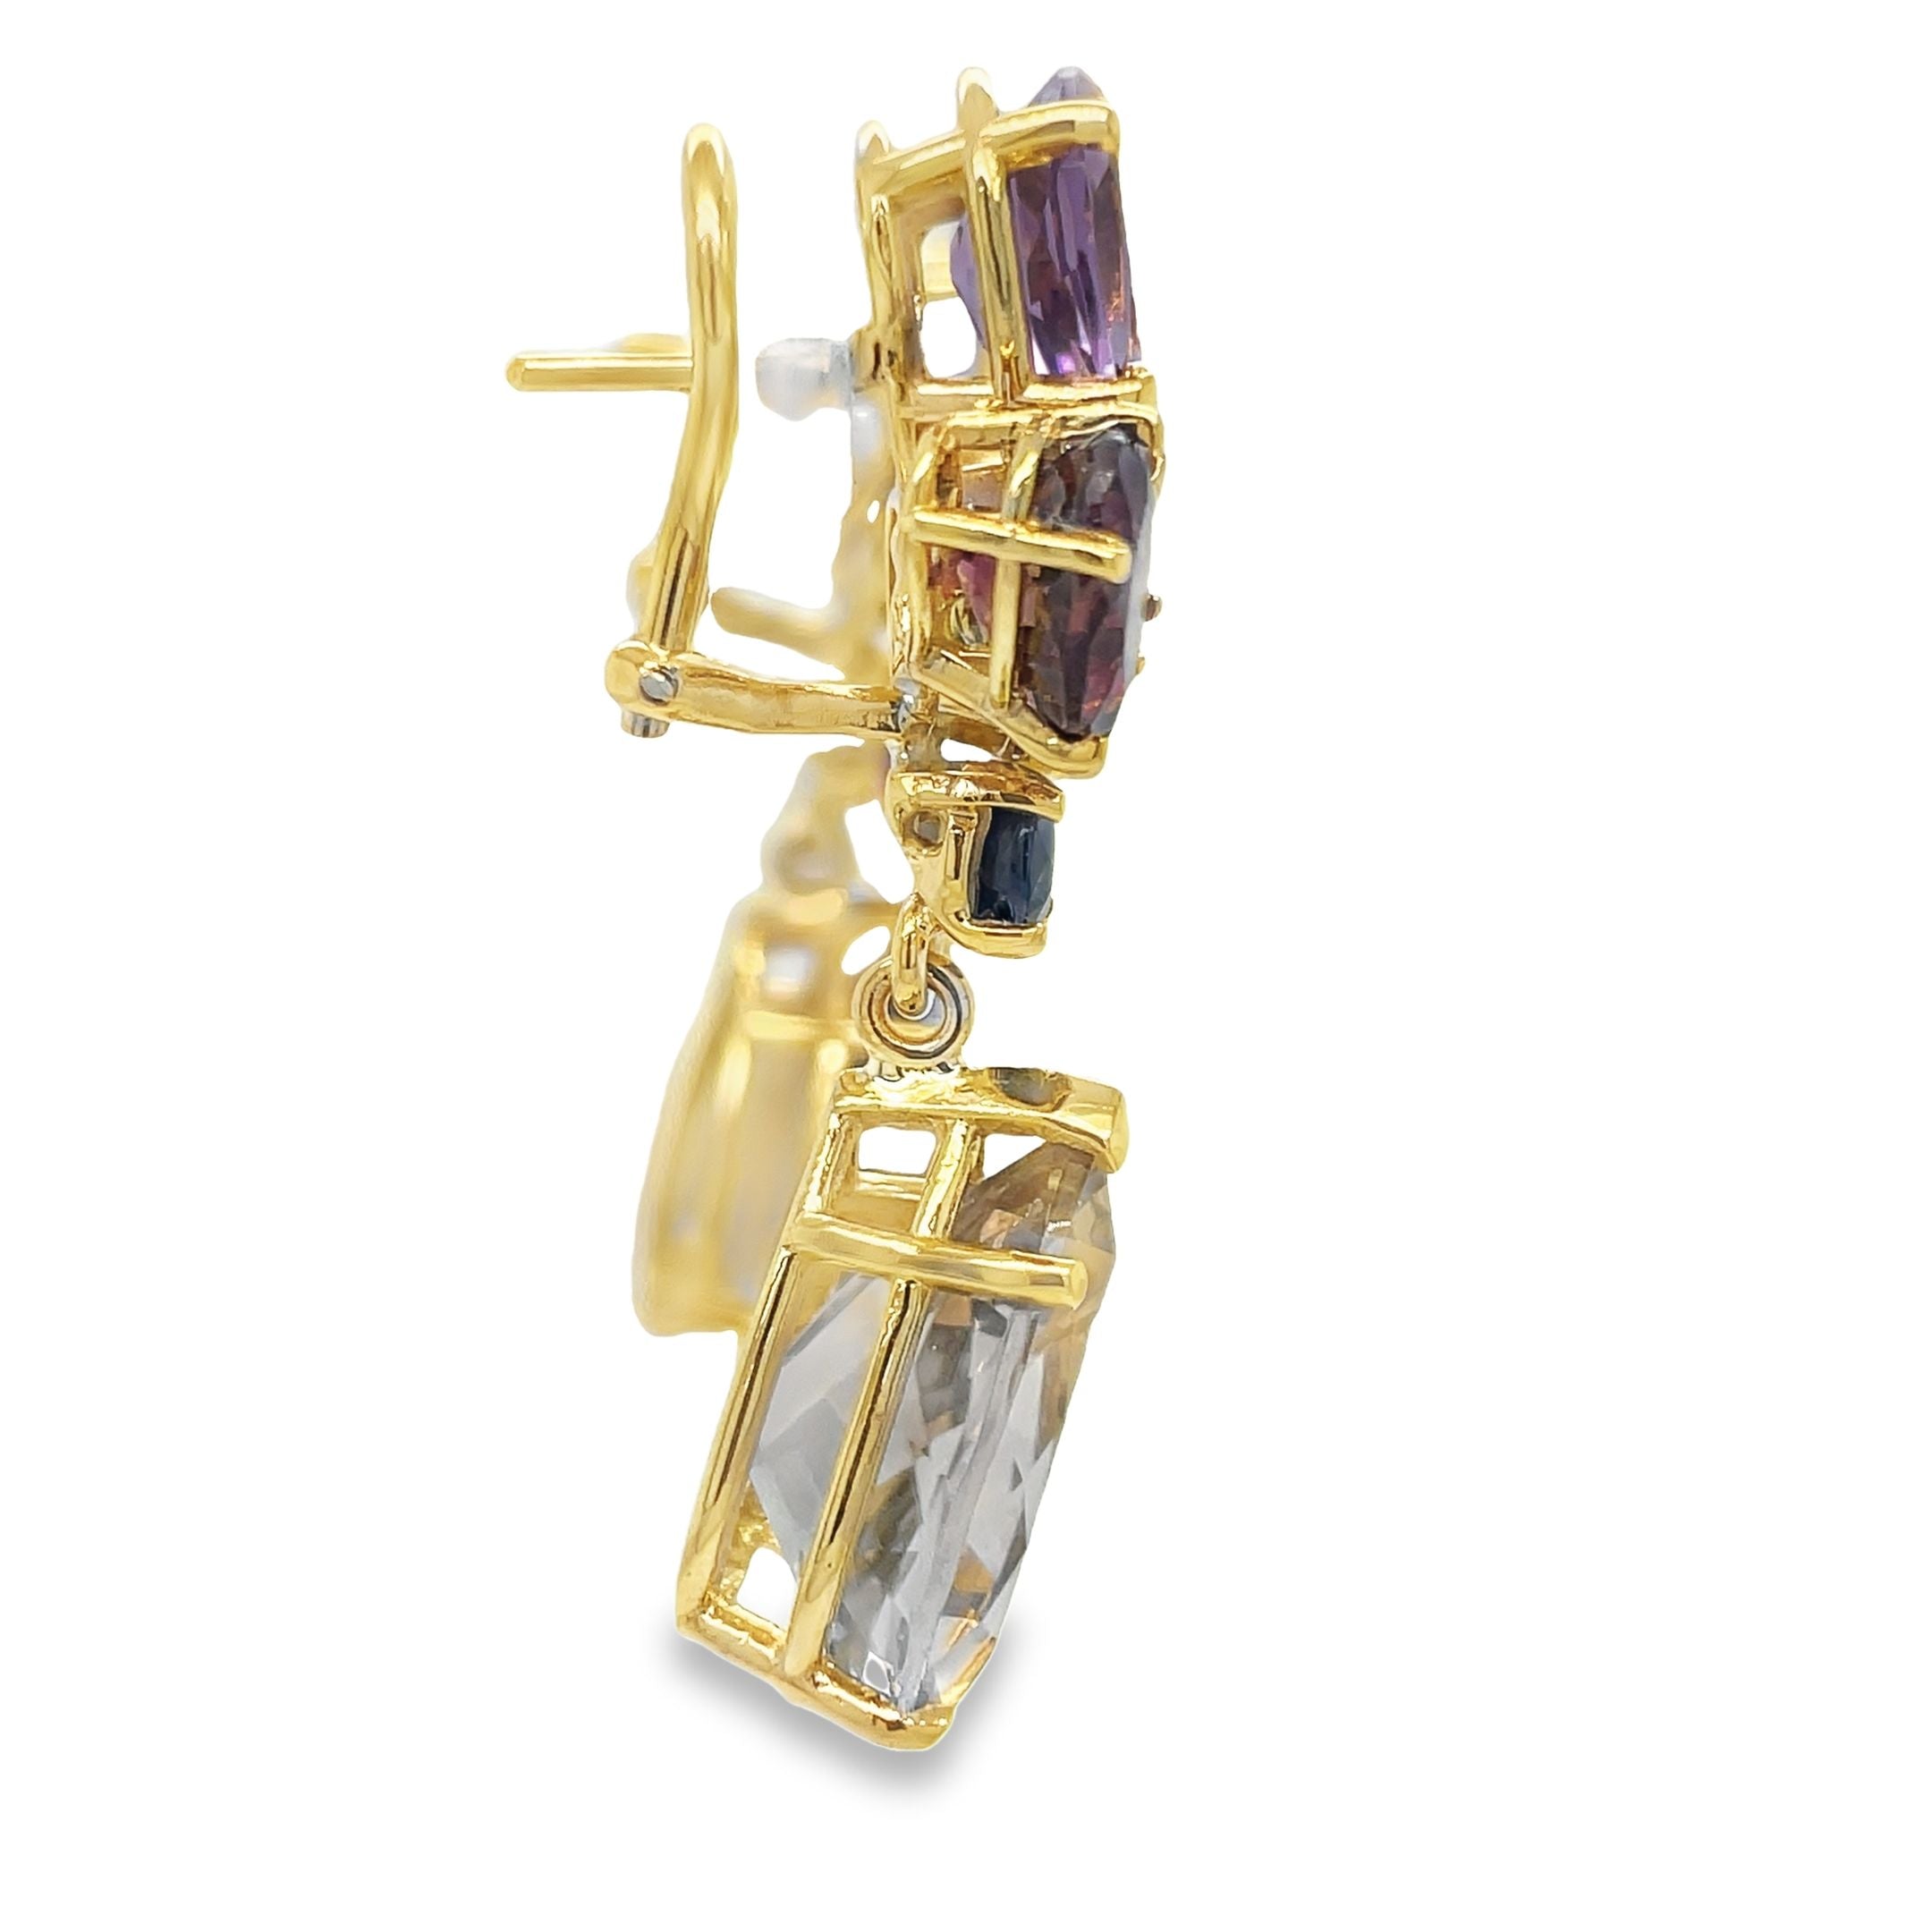 Experience elegance with these stunning 14k yellow gold Tourmaline &amp; Amethyst Drop Earrings. The secure omega clip provides comfort and ease, while the tourmaline and amethyst stones offer a touch of natural beauty. Perfect for any occasion, these earrings will elevate any outfit and make you feel confident and chic.